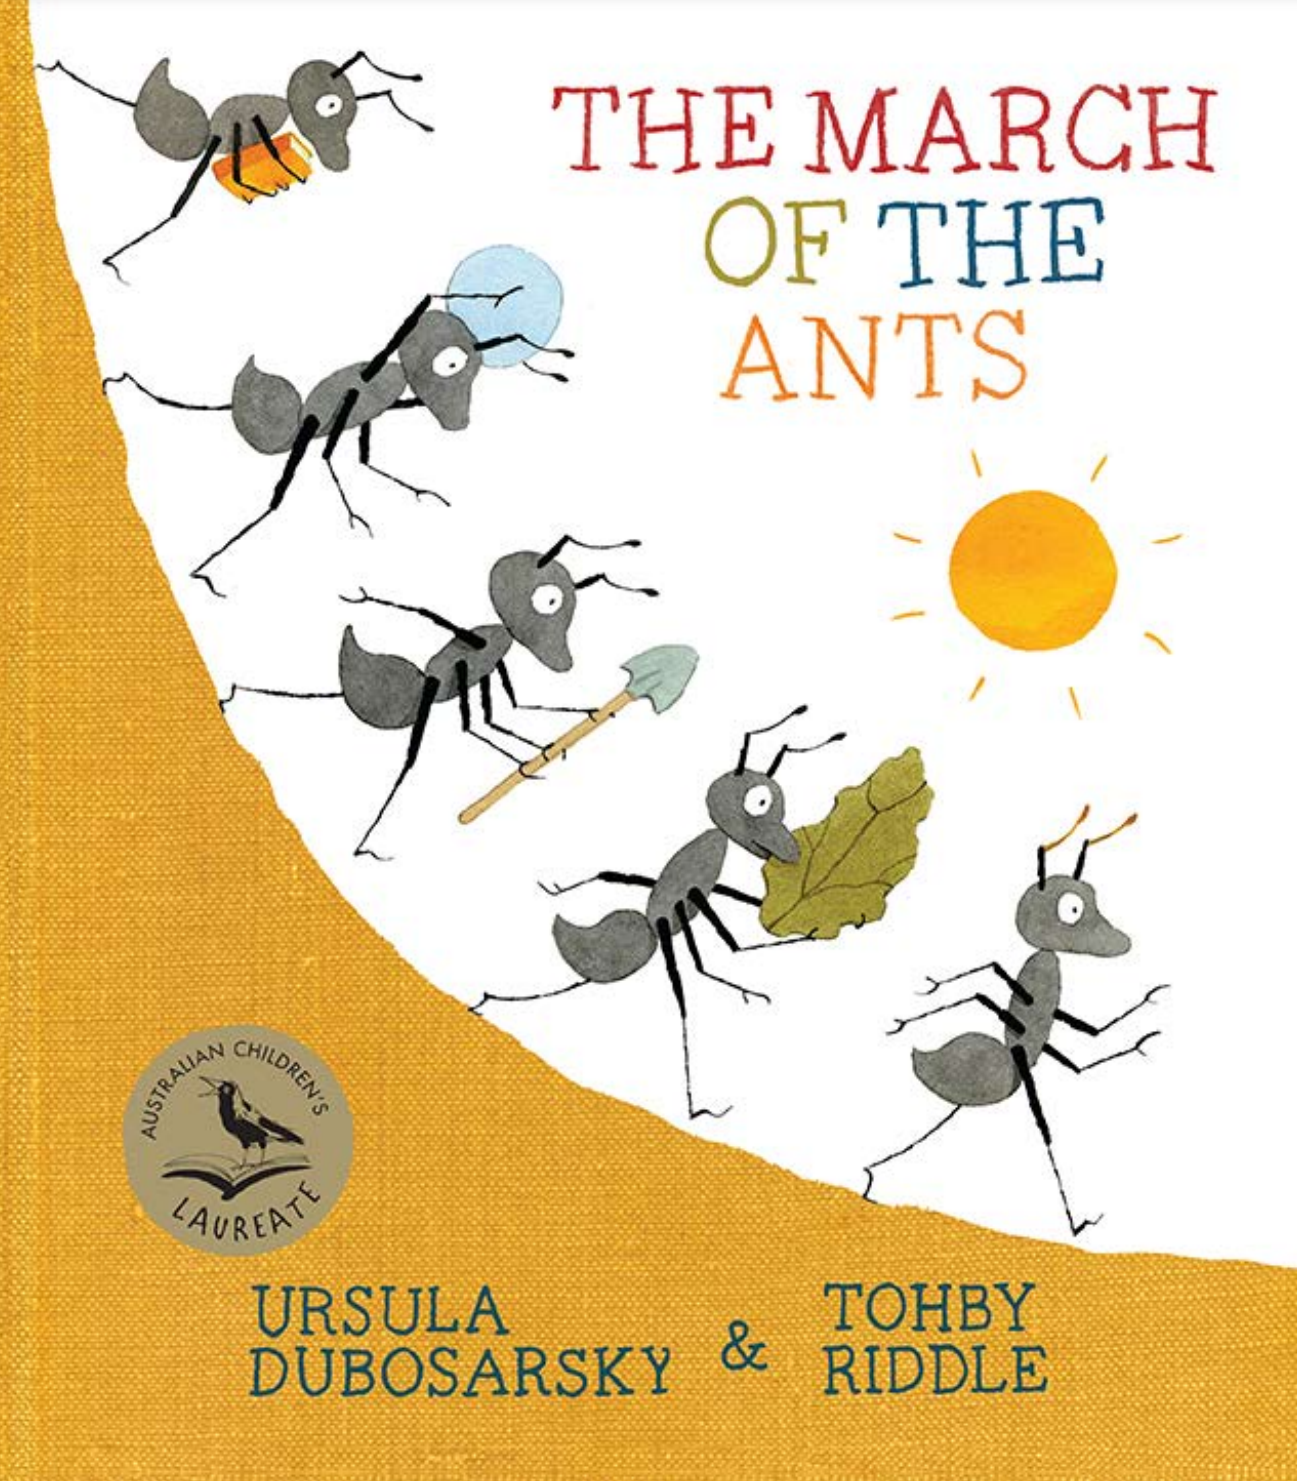 March of the ANTS FINAL COVER for publication.PNG